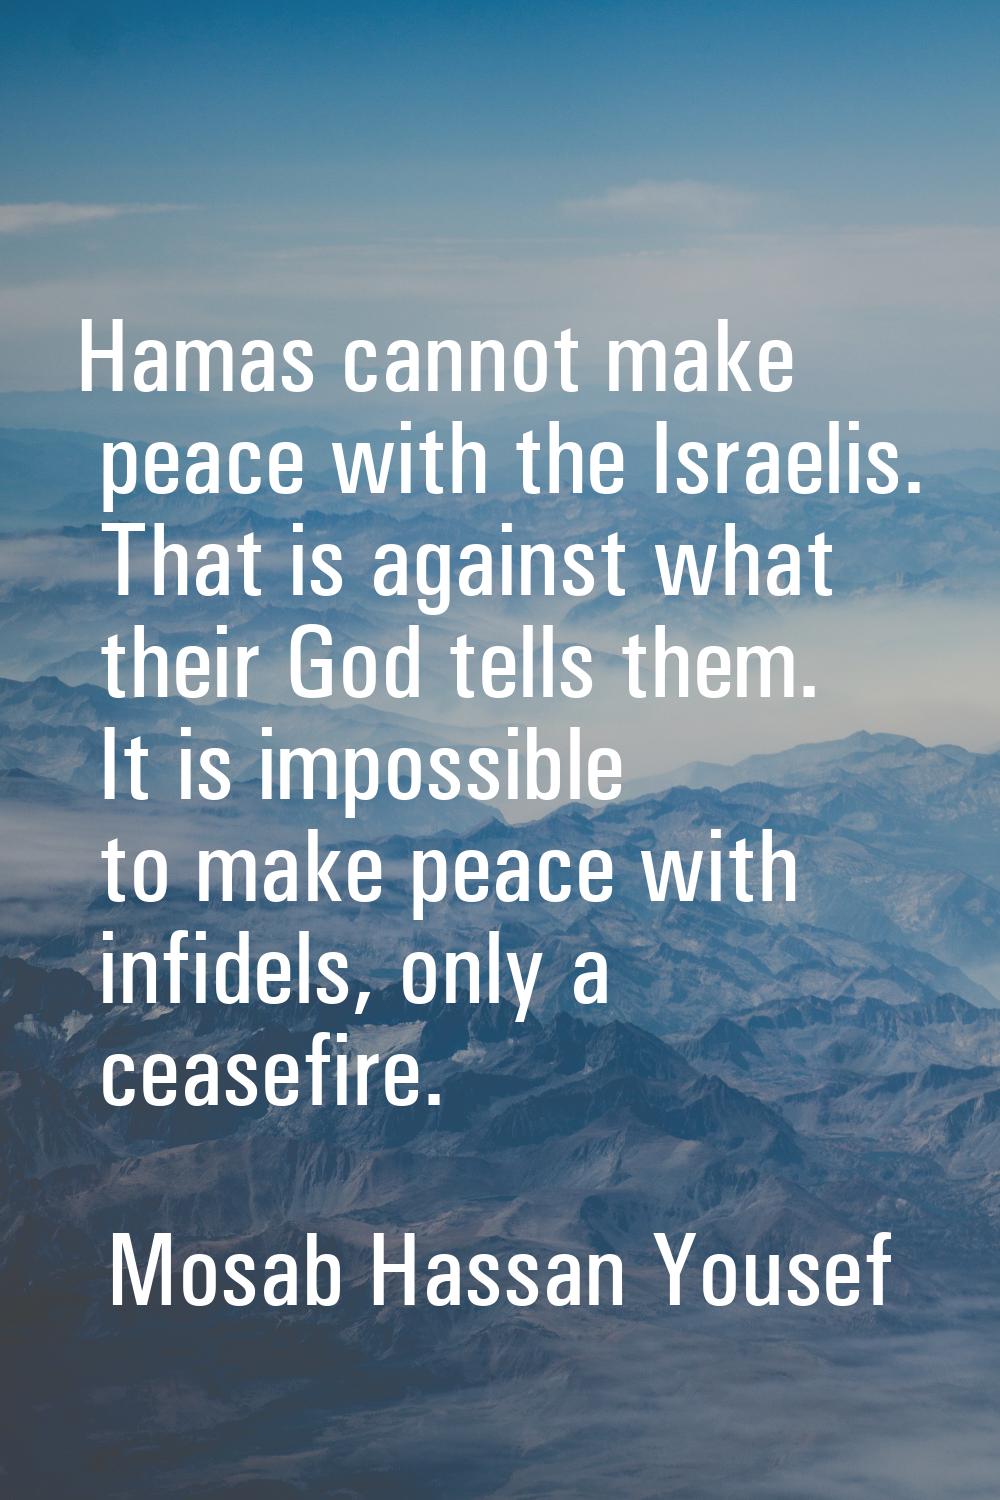 Hamas cannot make peace with the Israelis. That is against what their God tells them. It is impossi